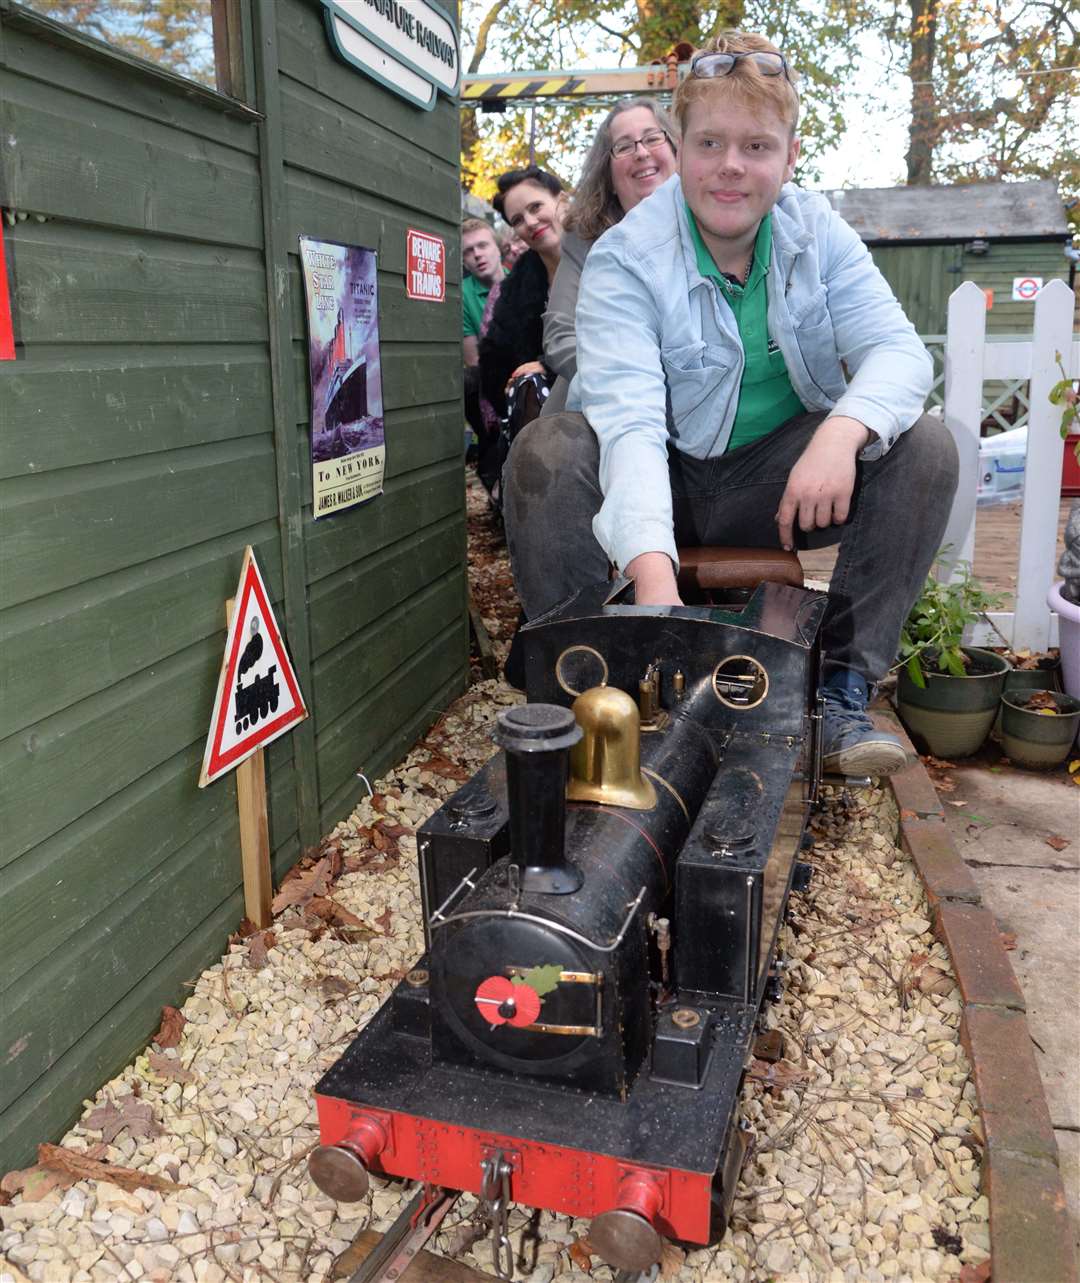 The train makes its way along the garden. Picture: Chris Davey